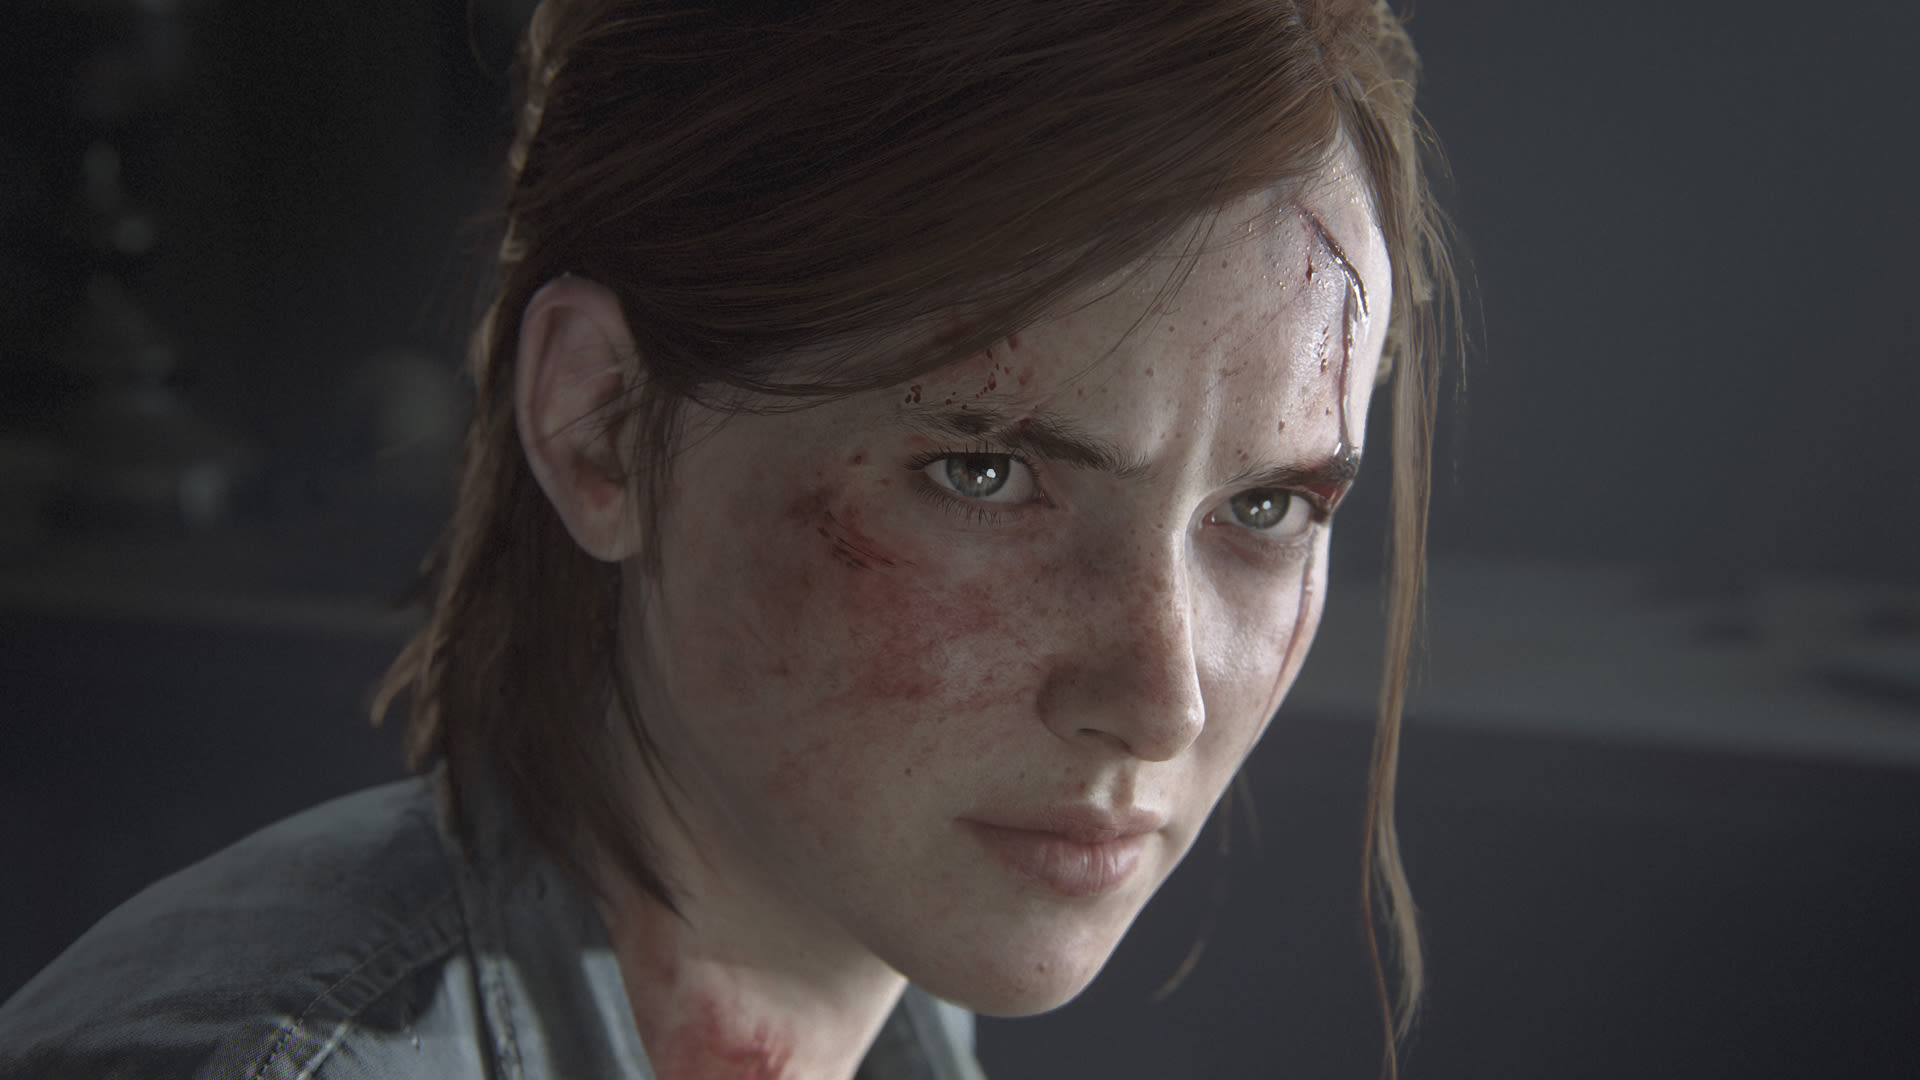 The Last of Us director Neil Druckmann says his next game could "redefine mainstream perceptions of gaming" - but it still doesn't sound like The Last of Us 3